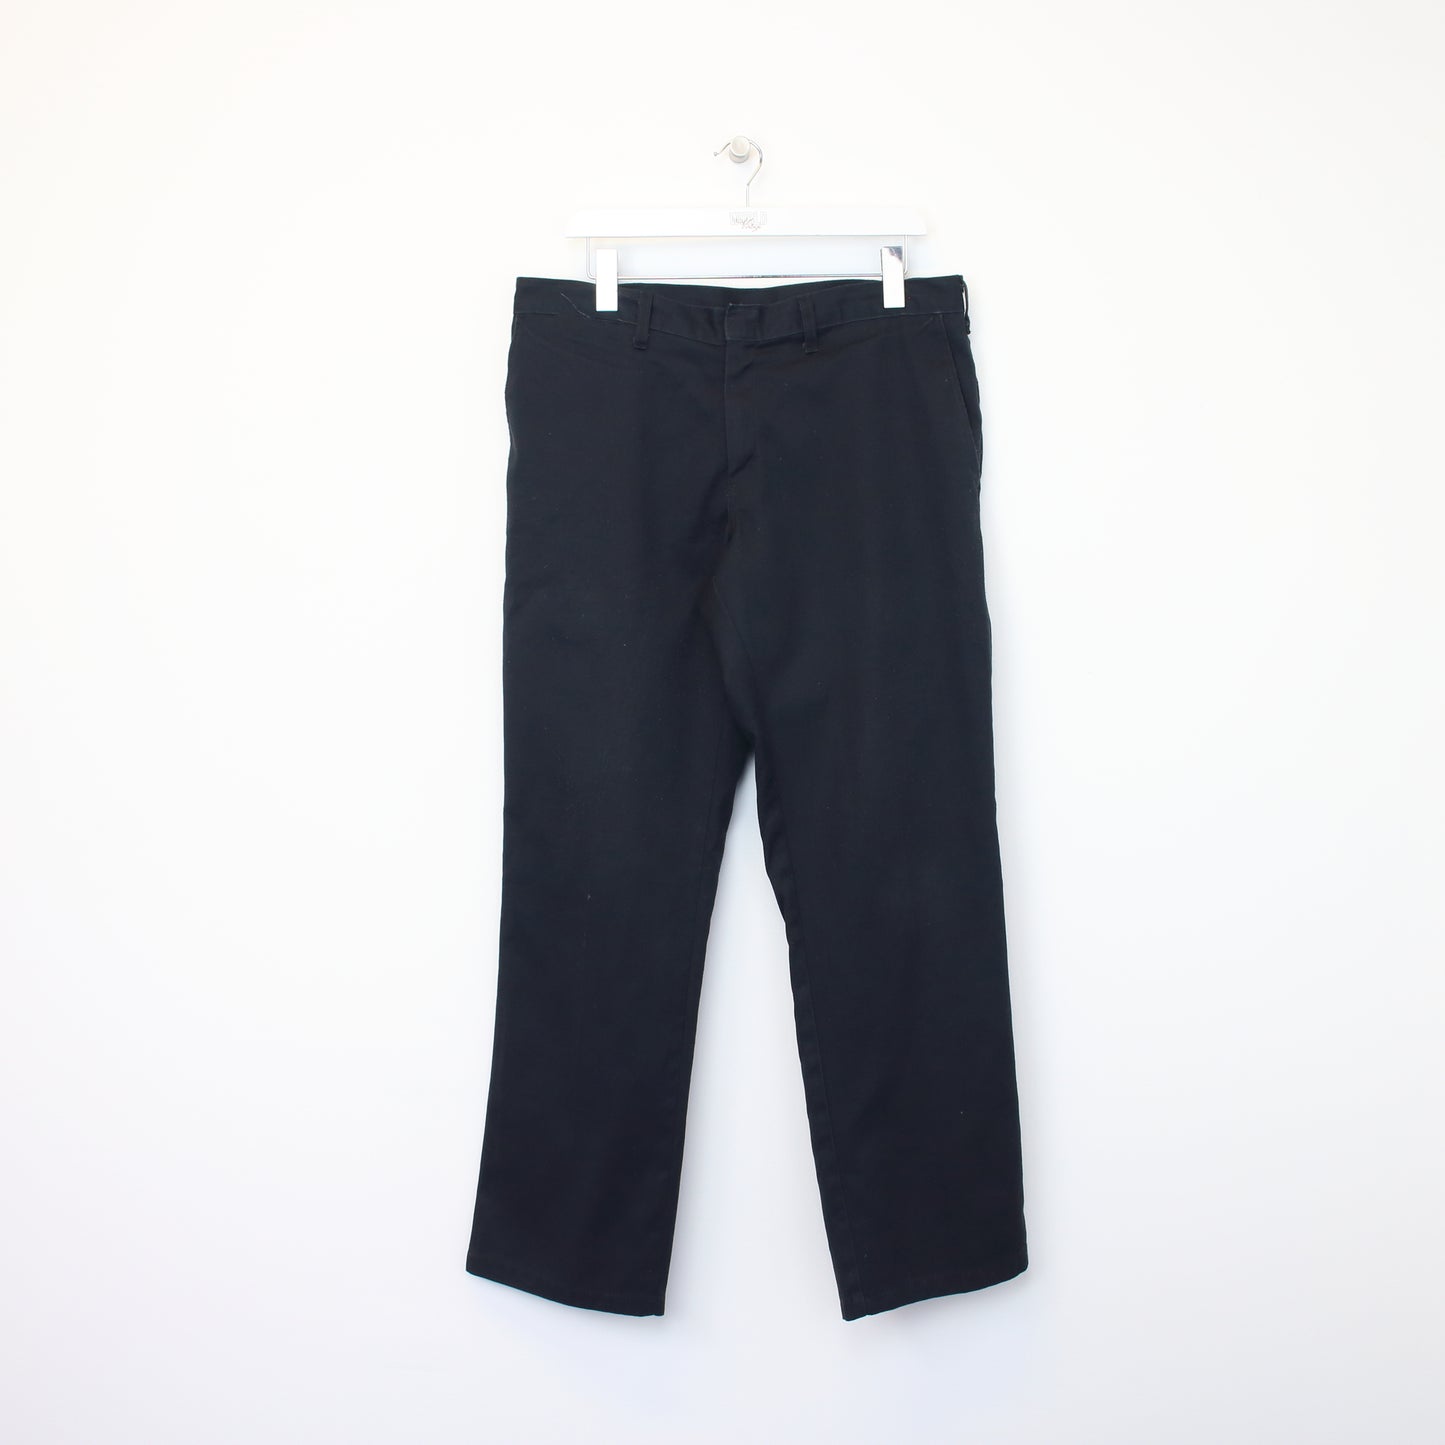 Vintage Unbranded trousers in black. Best fits W36